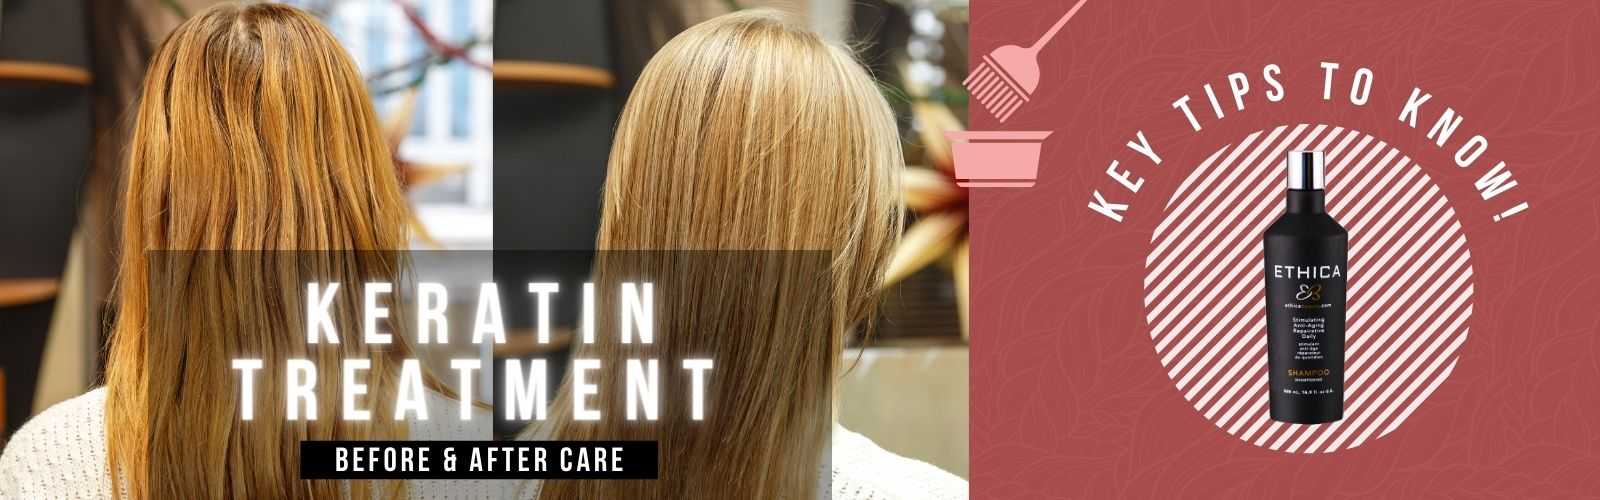 Keratin Treatments Before and After Care | Salon Dolce Vita